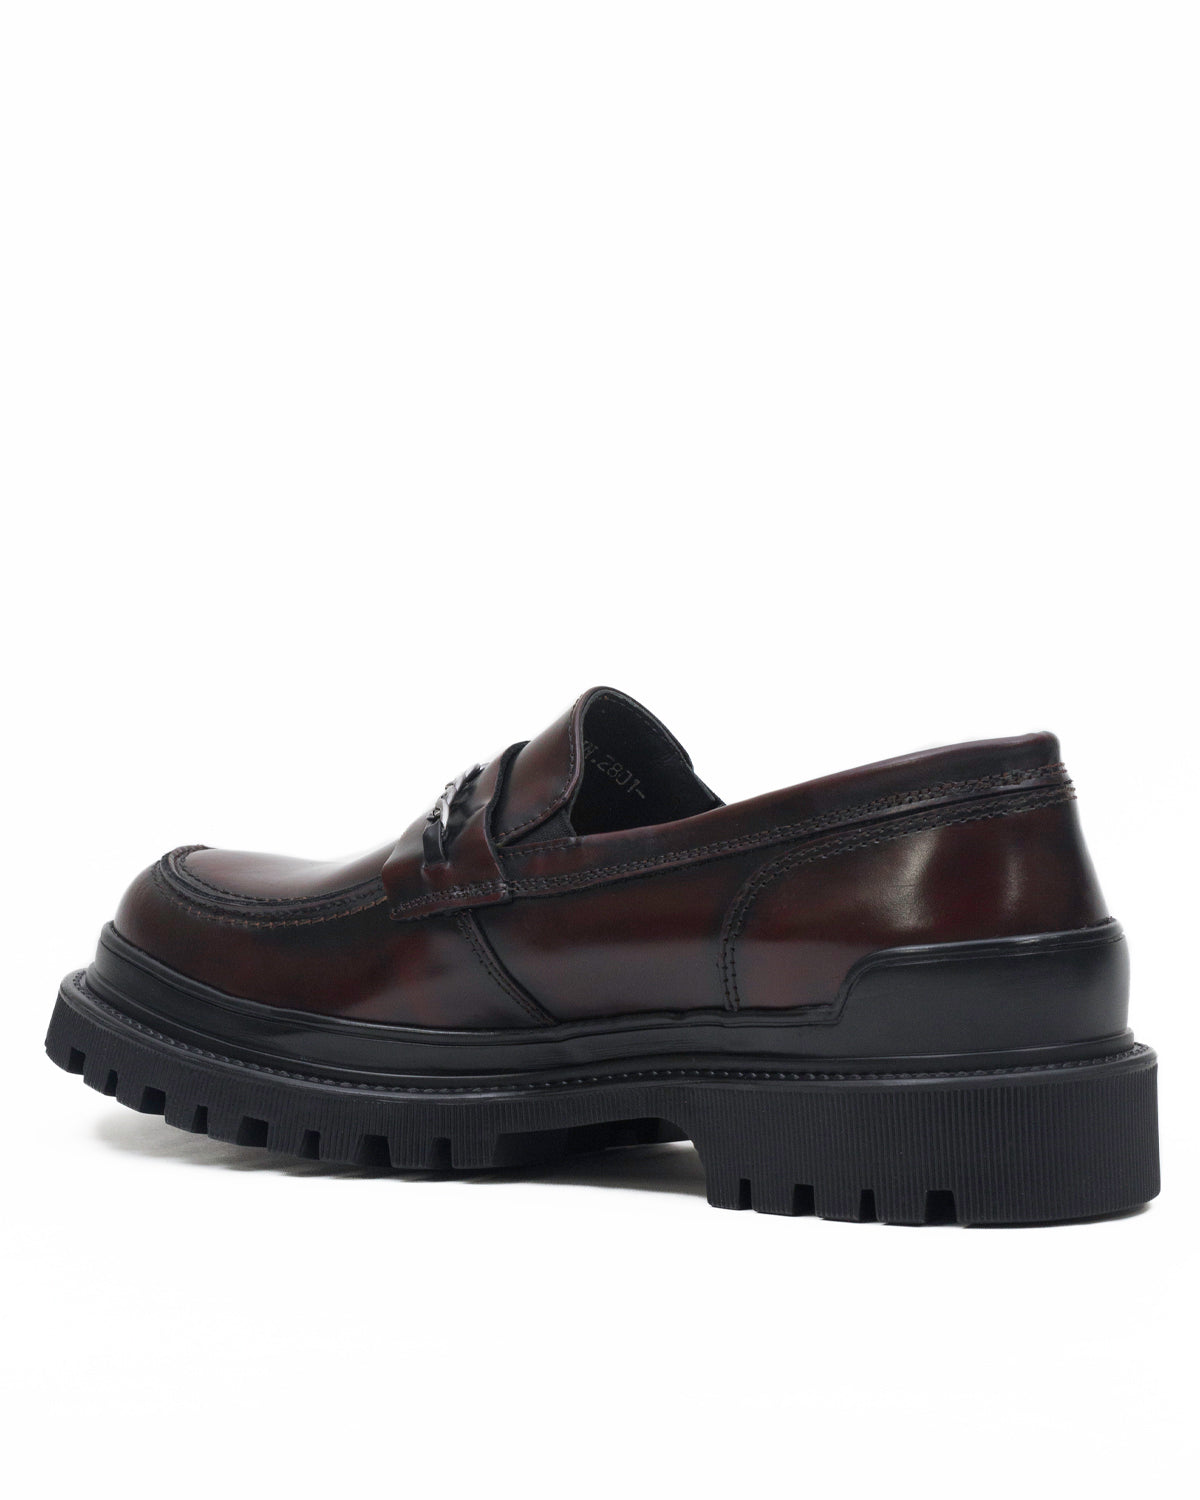 MISAEL WINE LOAFERS